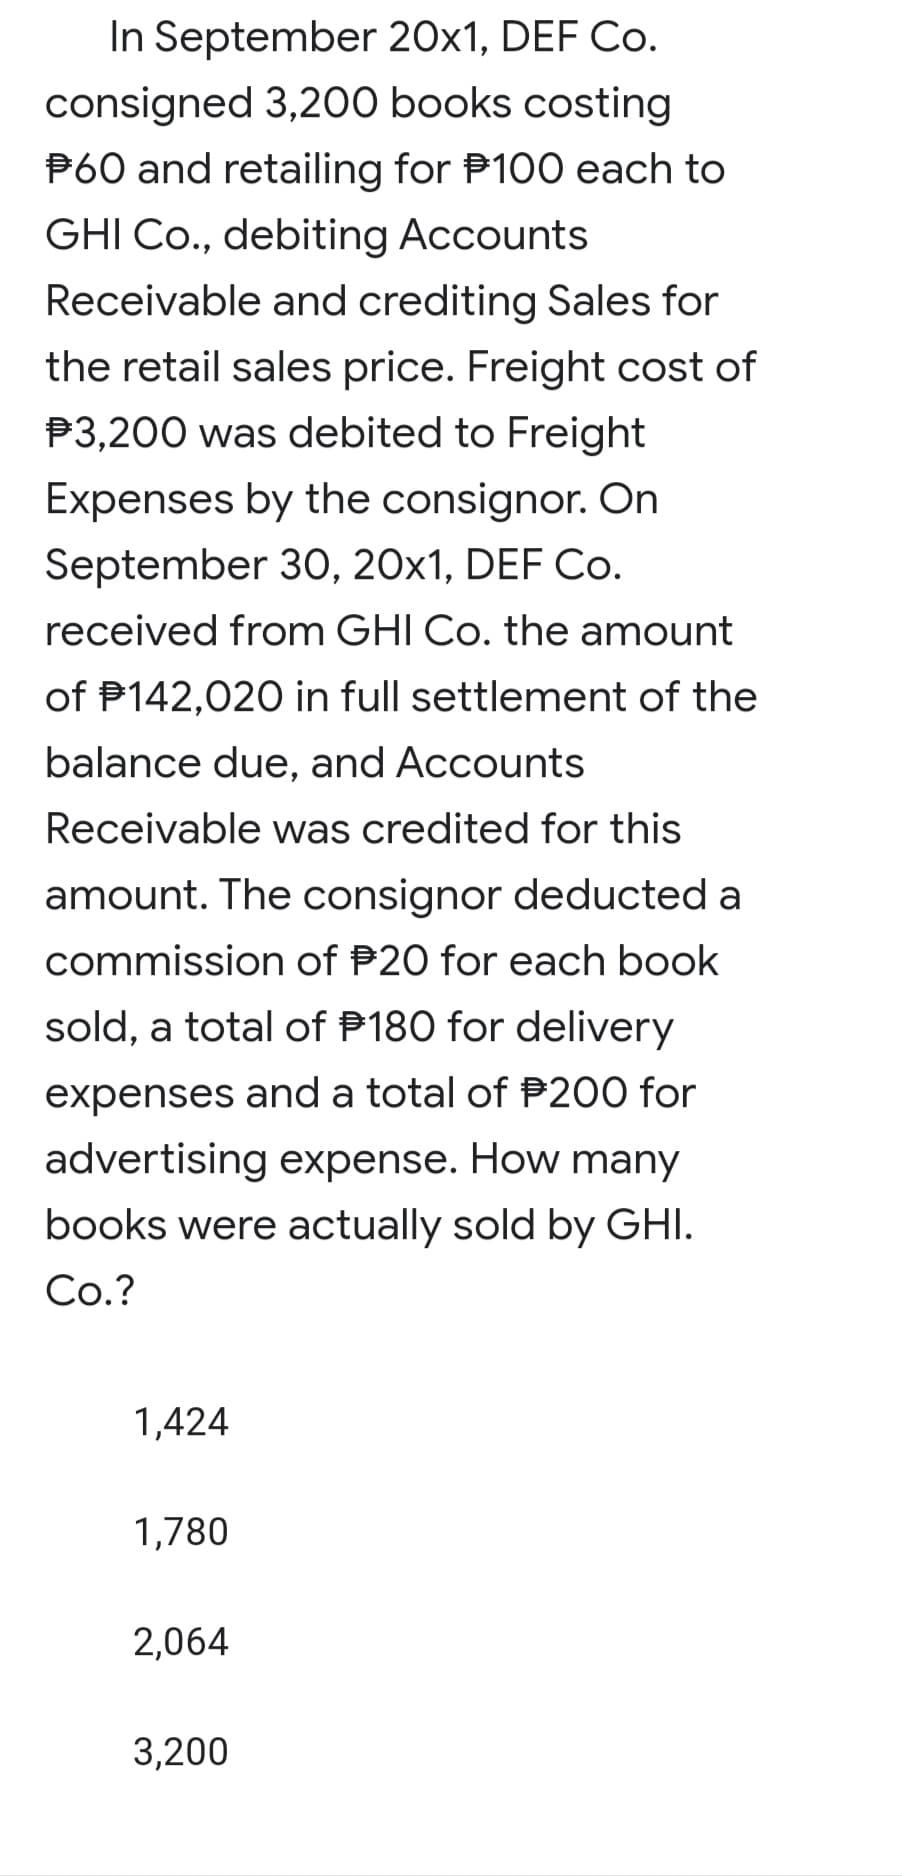 In September 20x1, DEF Co.
consigned 3,200 books costing
P60 and retailing for P100 each to
GHI Co., debiting Accounts
Receivable and crediting Sales for
the retail sales price. Freight cost of
P3,200 was debited to Freight
Expenses by the consignor. On
September 3O, 20x1, DEF Co.
received from GHI Co. the amount
of P142,020 in full settlement of the
balance due, and Accounts
Receivable was credited for this
amount. The consignor deducted a
commission of P20 for each book
sold, a total of P180 for delivery
expenses and a total of P200 for
advertising expense. How many
books were actually sold by GHI.
Co.?
1,424
1,780
2,064
3,200
